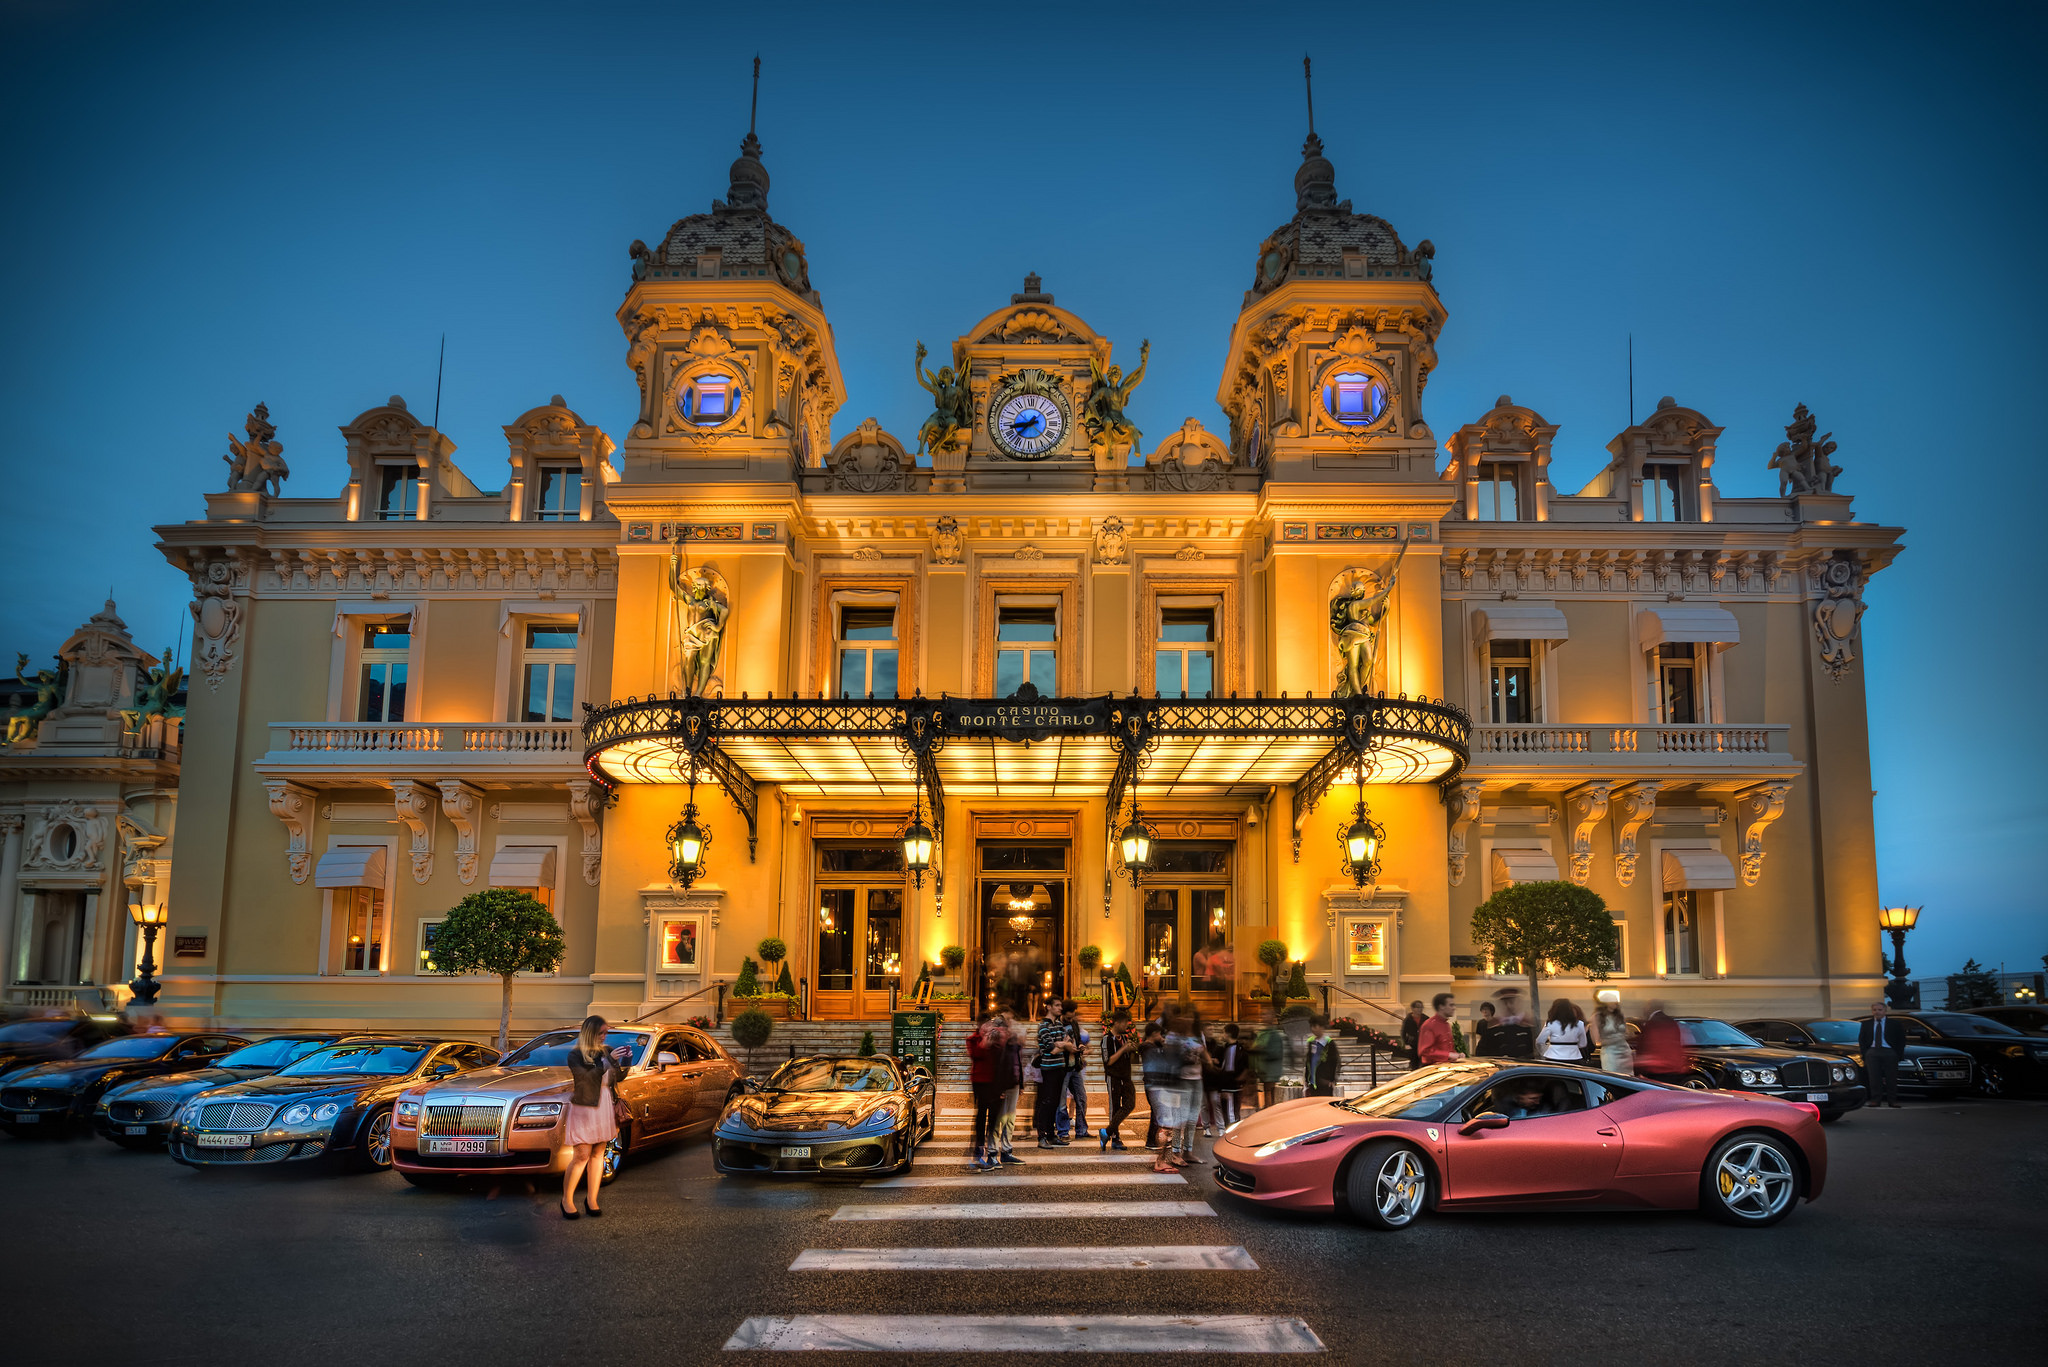 Big chances are you haven't been to these five glamorous and famous casino houses in the world